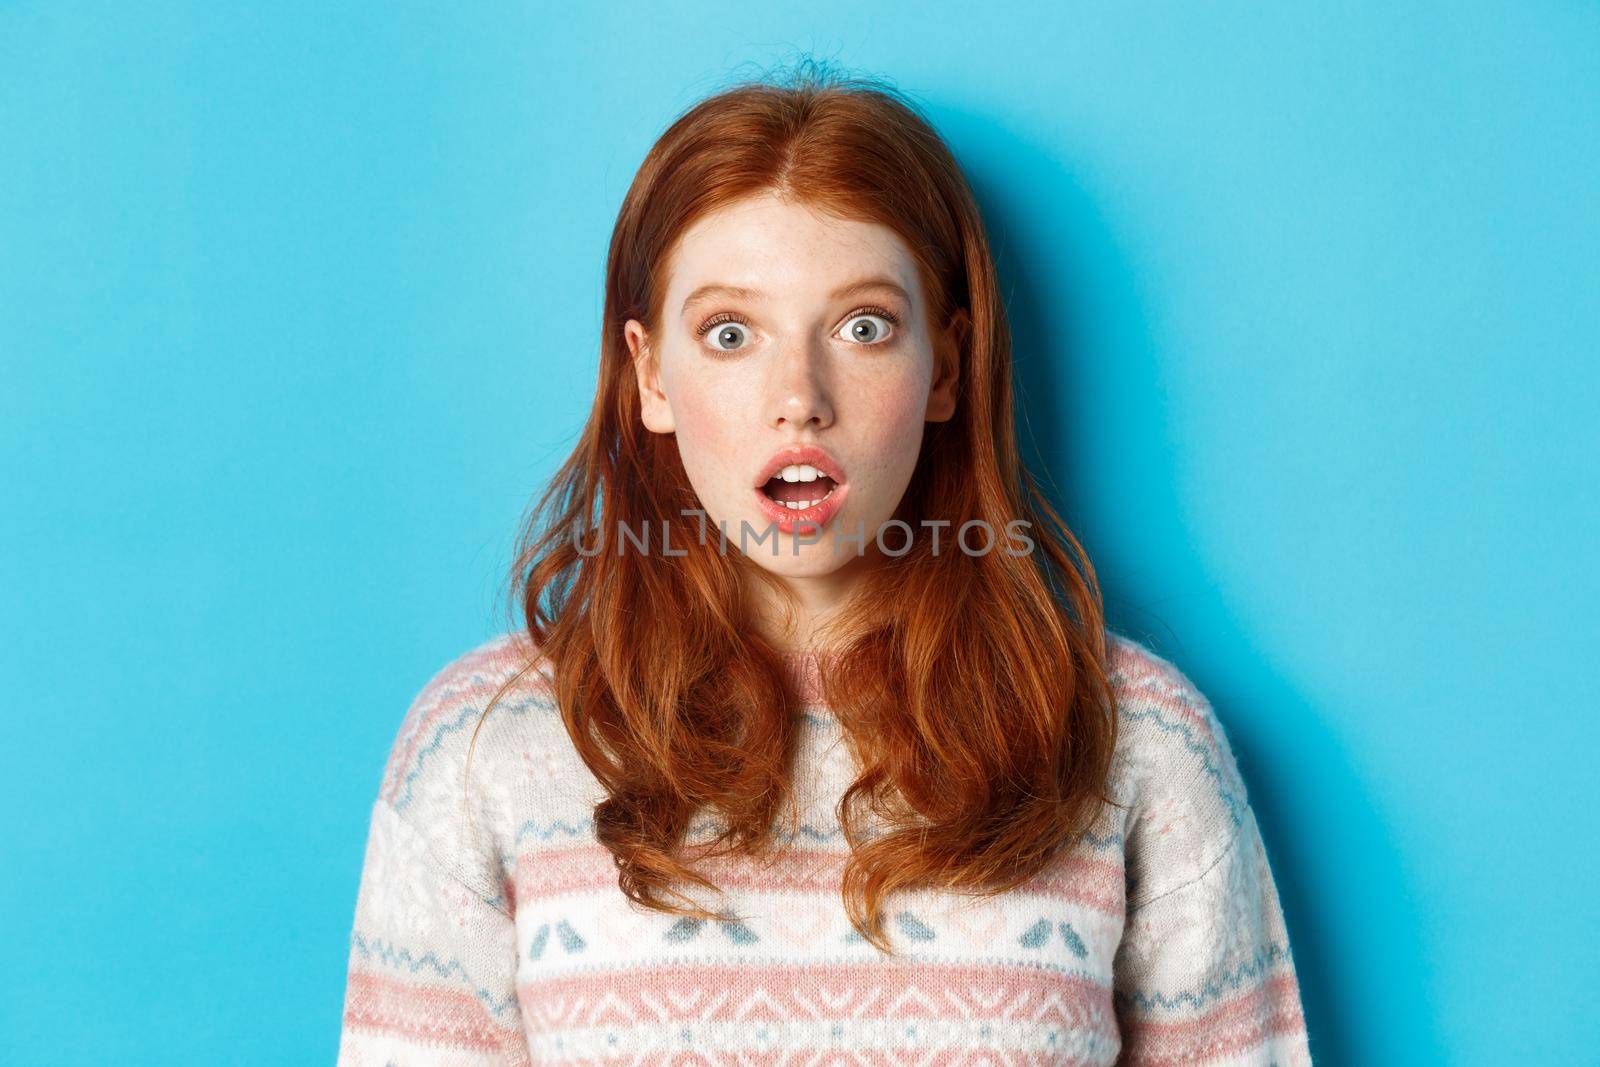 Close-up of shocked redhead girl drop jaw in awe, staring with amazement at camera, standing against blue background.